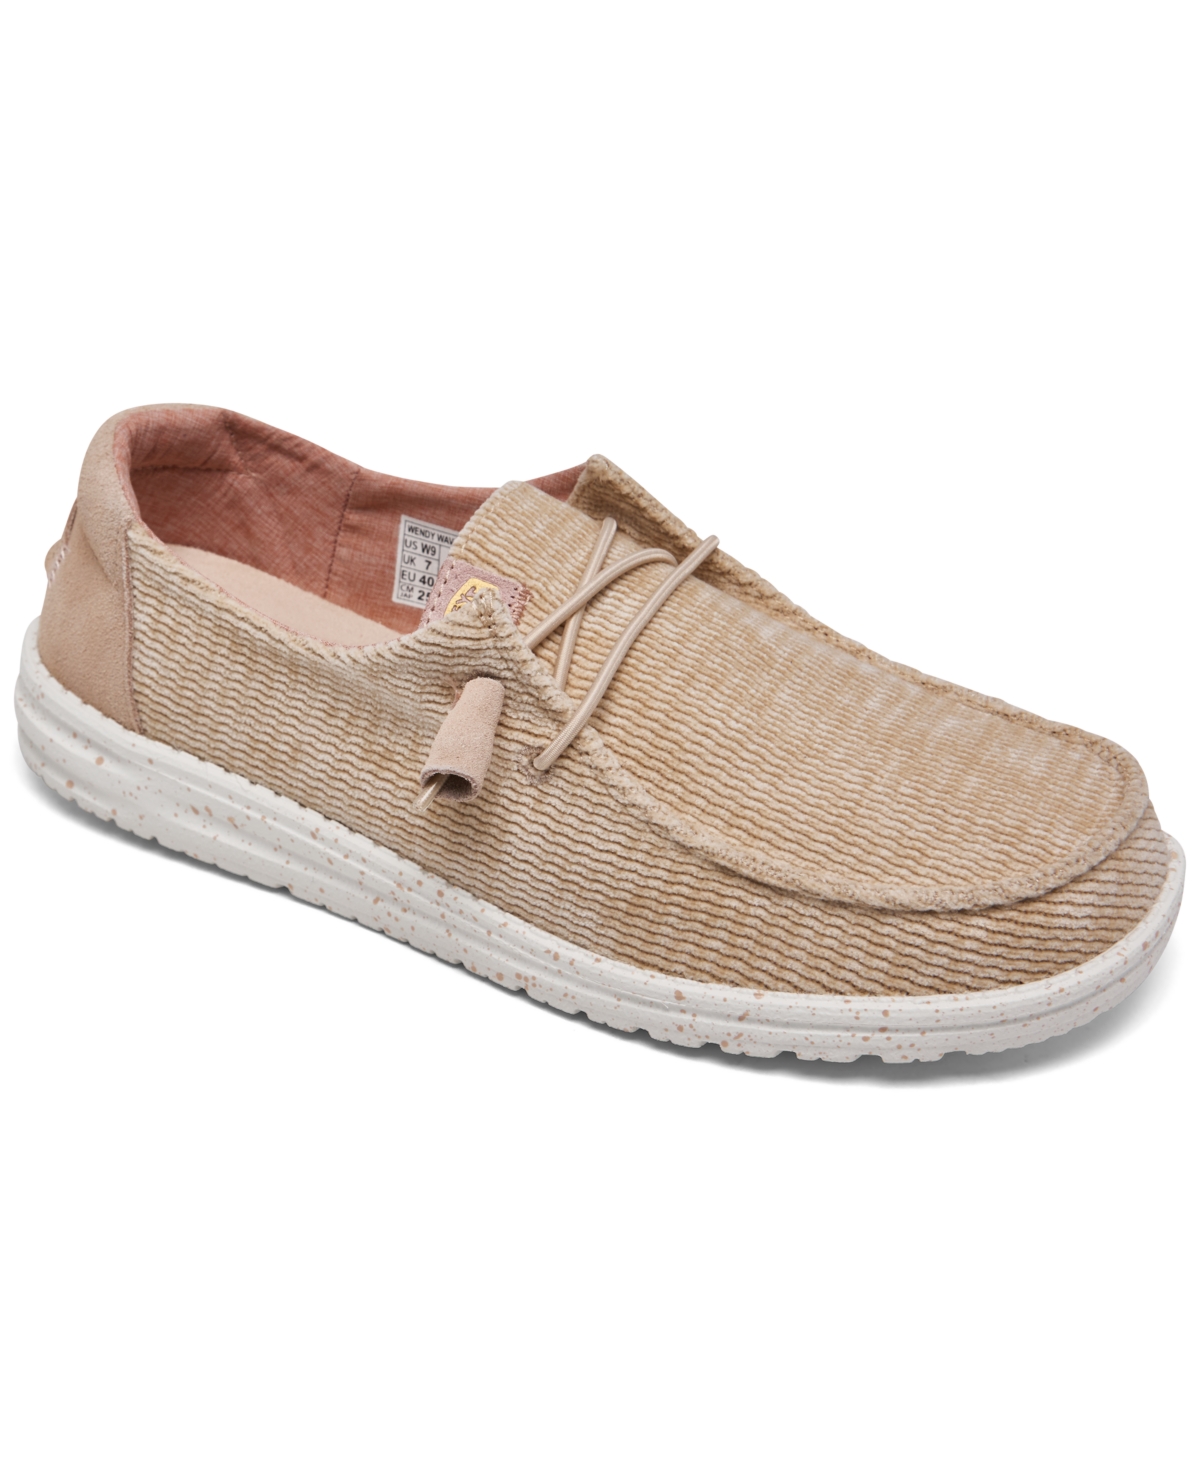 Women's Wendy Corduroy Slip-On Casual Moccasin Sneakers from Finish Line - Pink